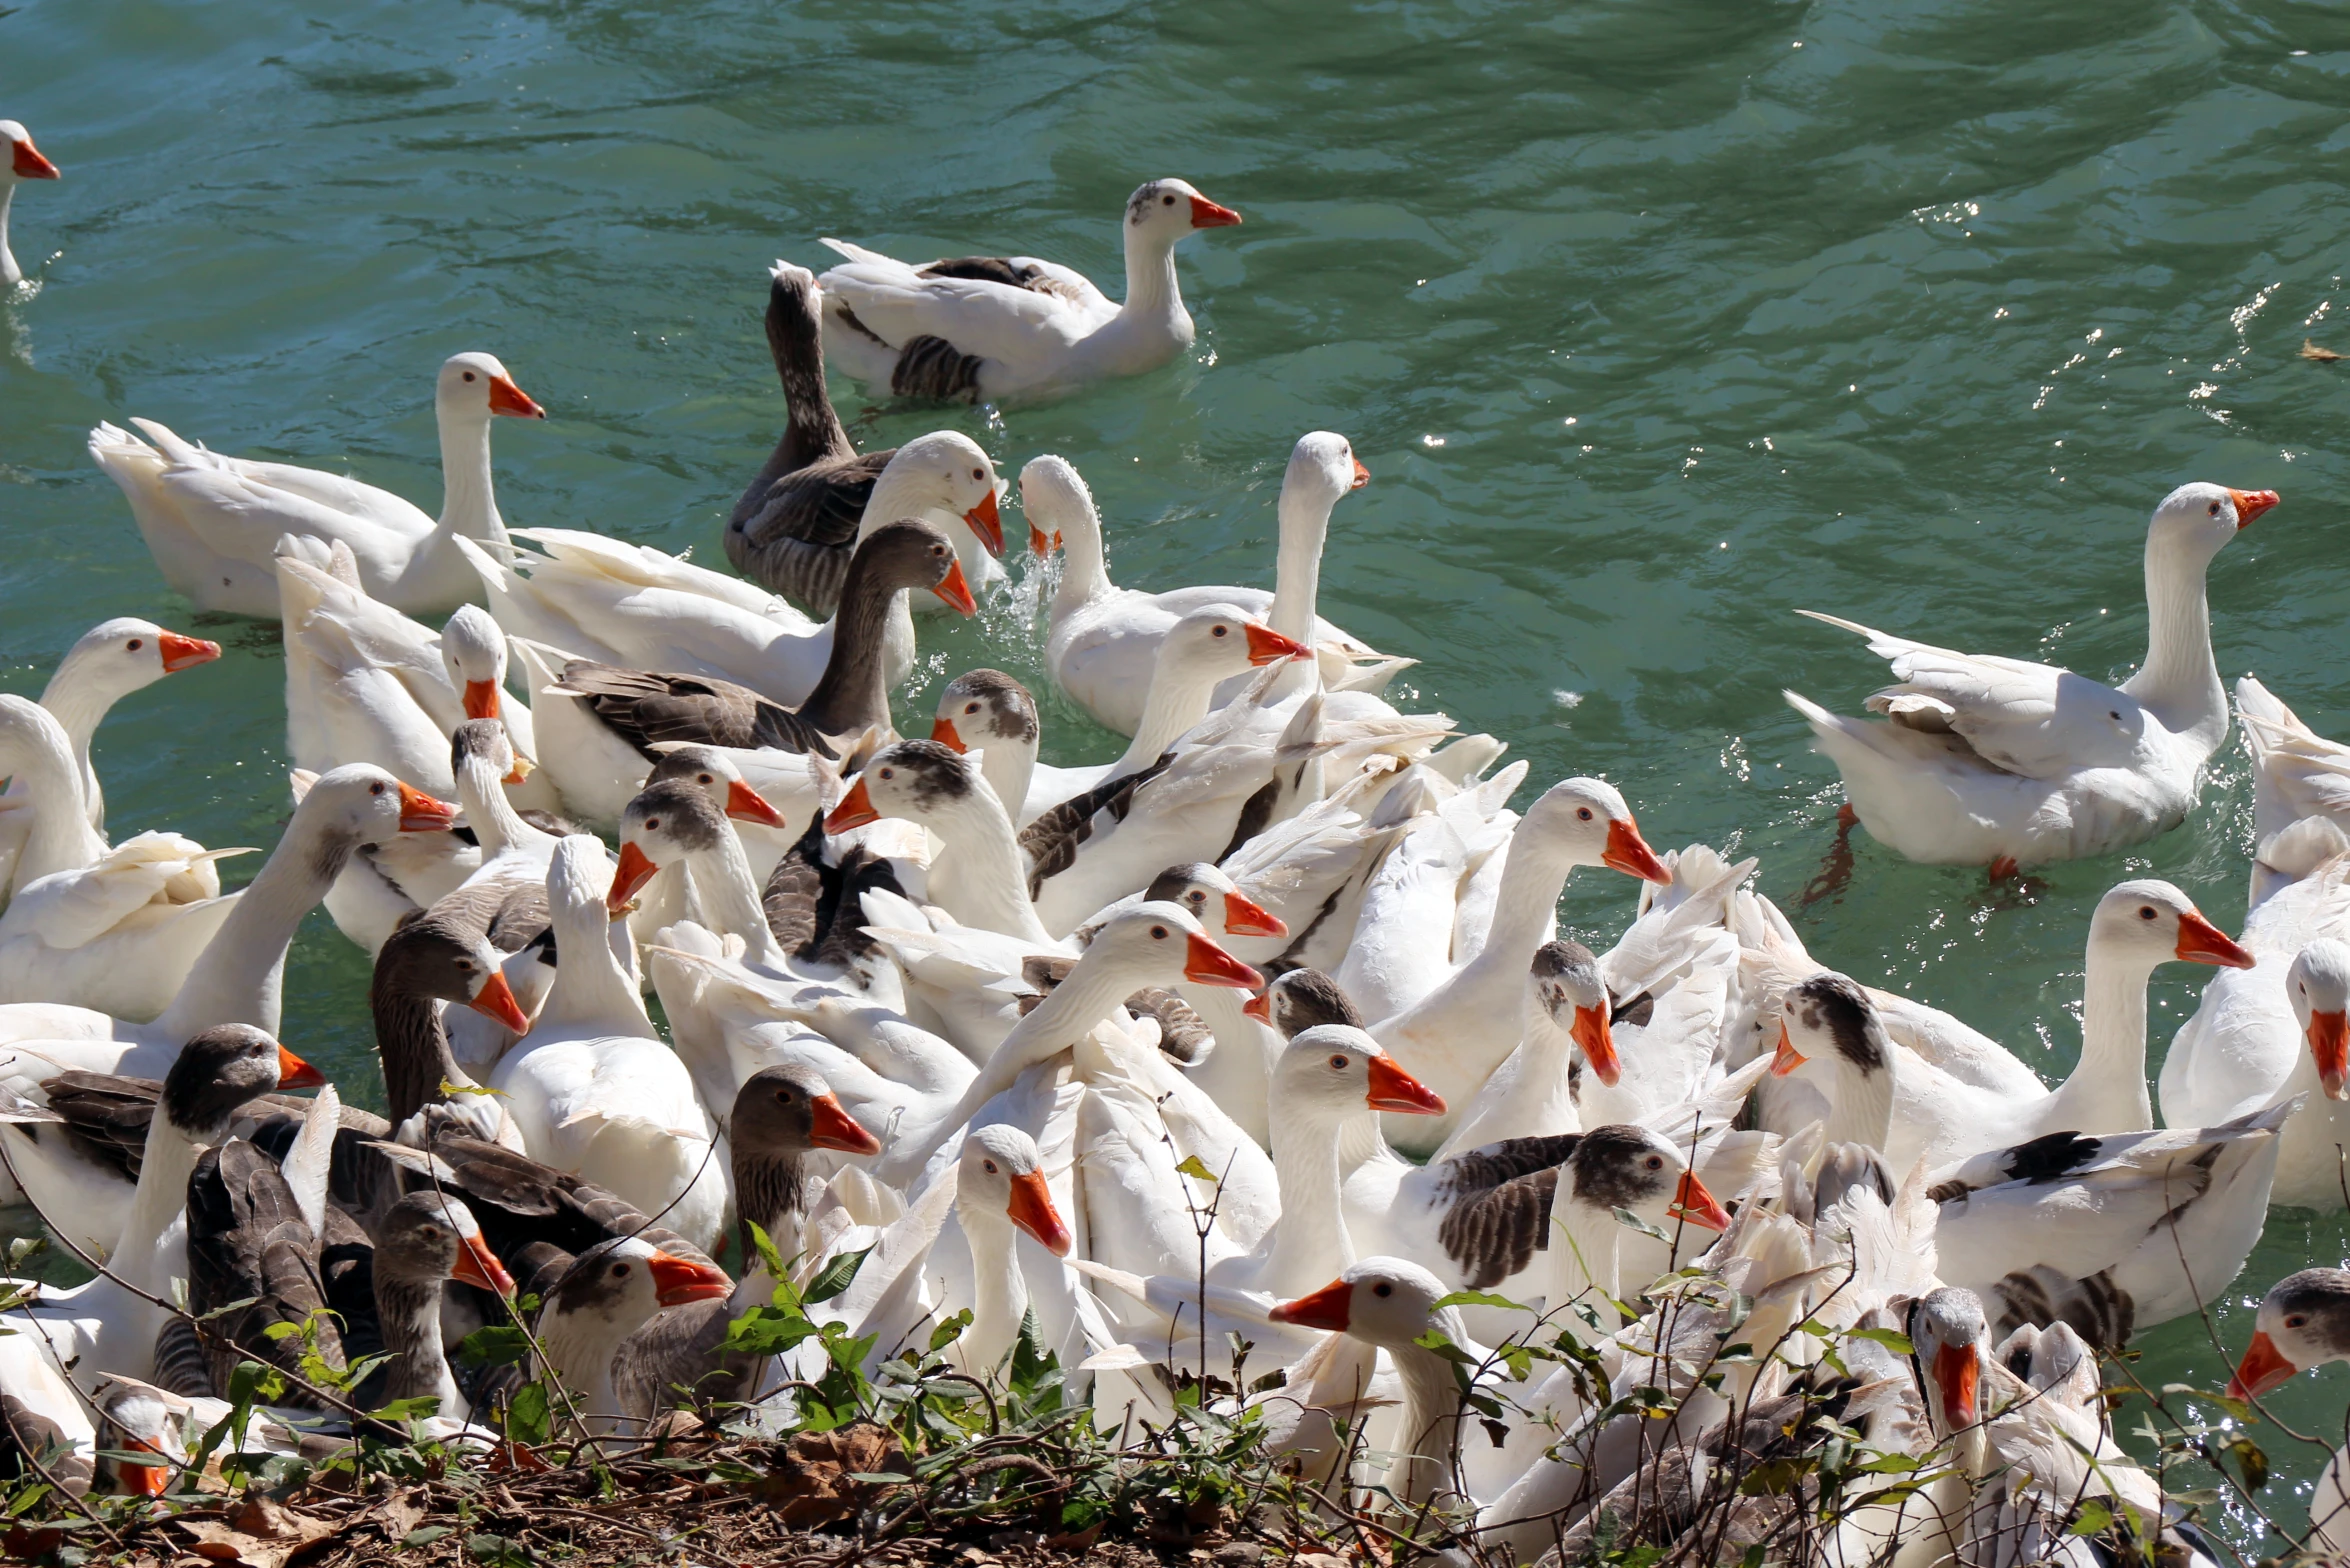 large flock of birds sitting near the water